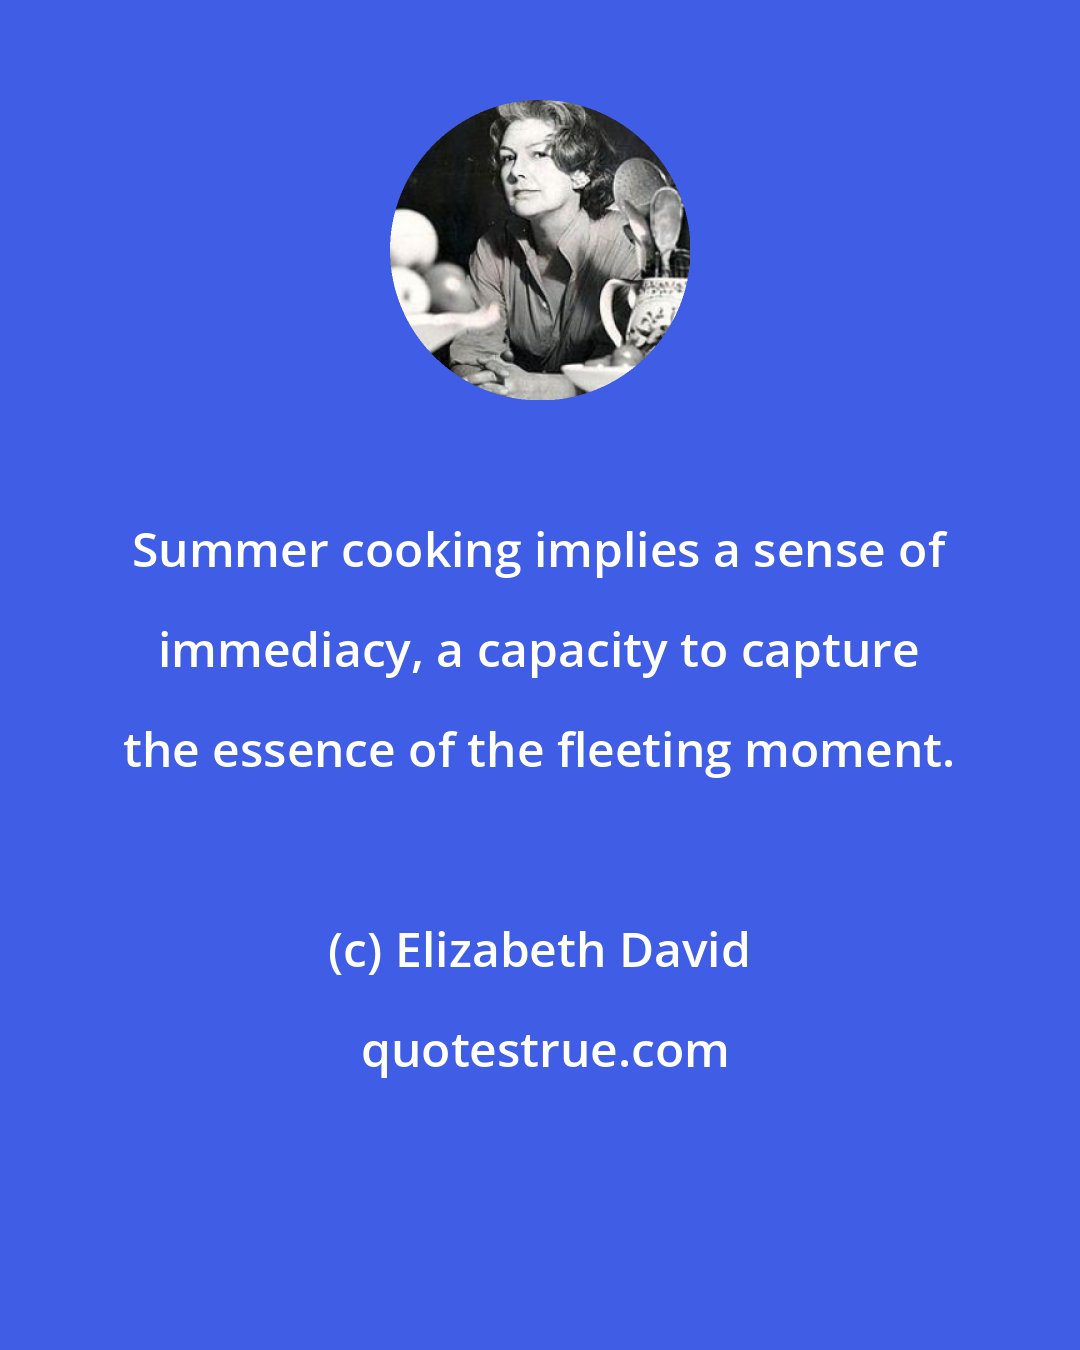 Elizabeth David: Summer cooking implies a sense of immediacy, a capacity to capture the essence of the fleeting moment.